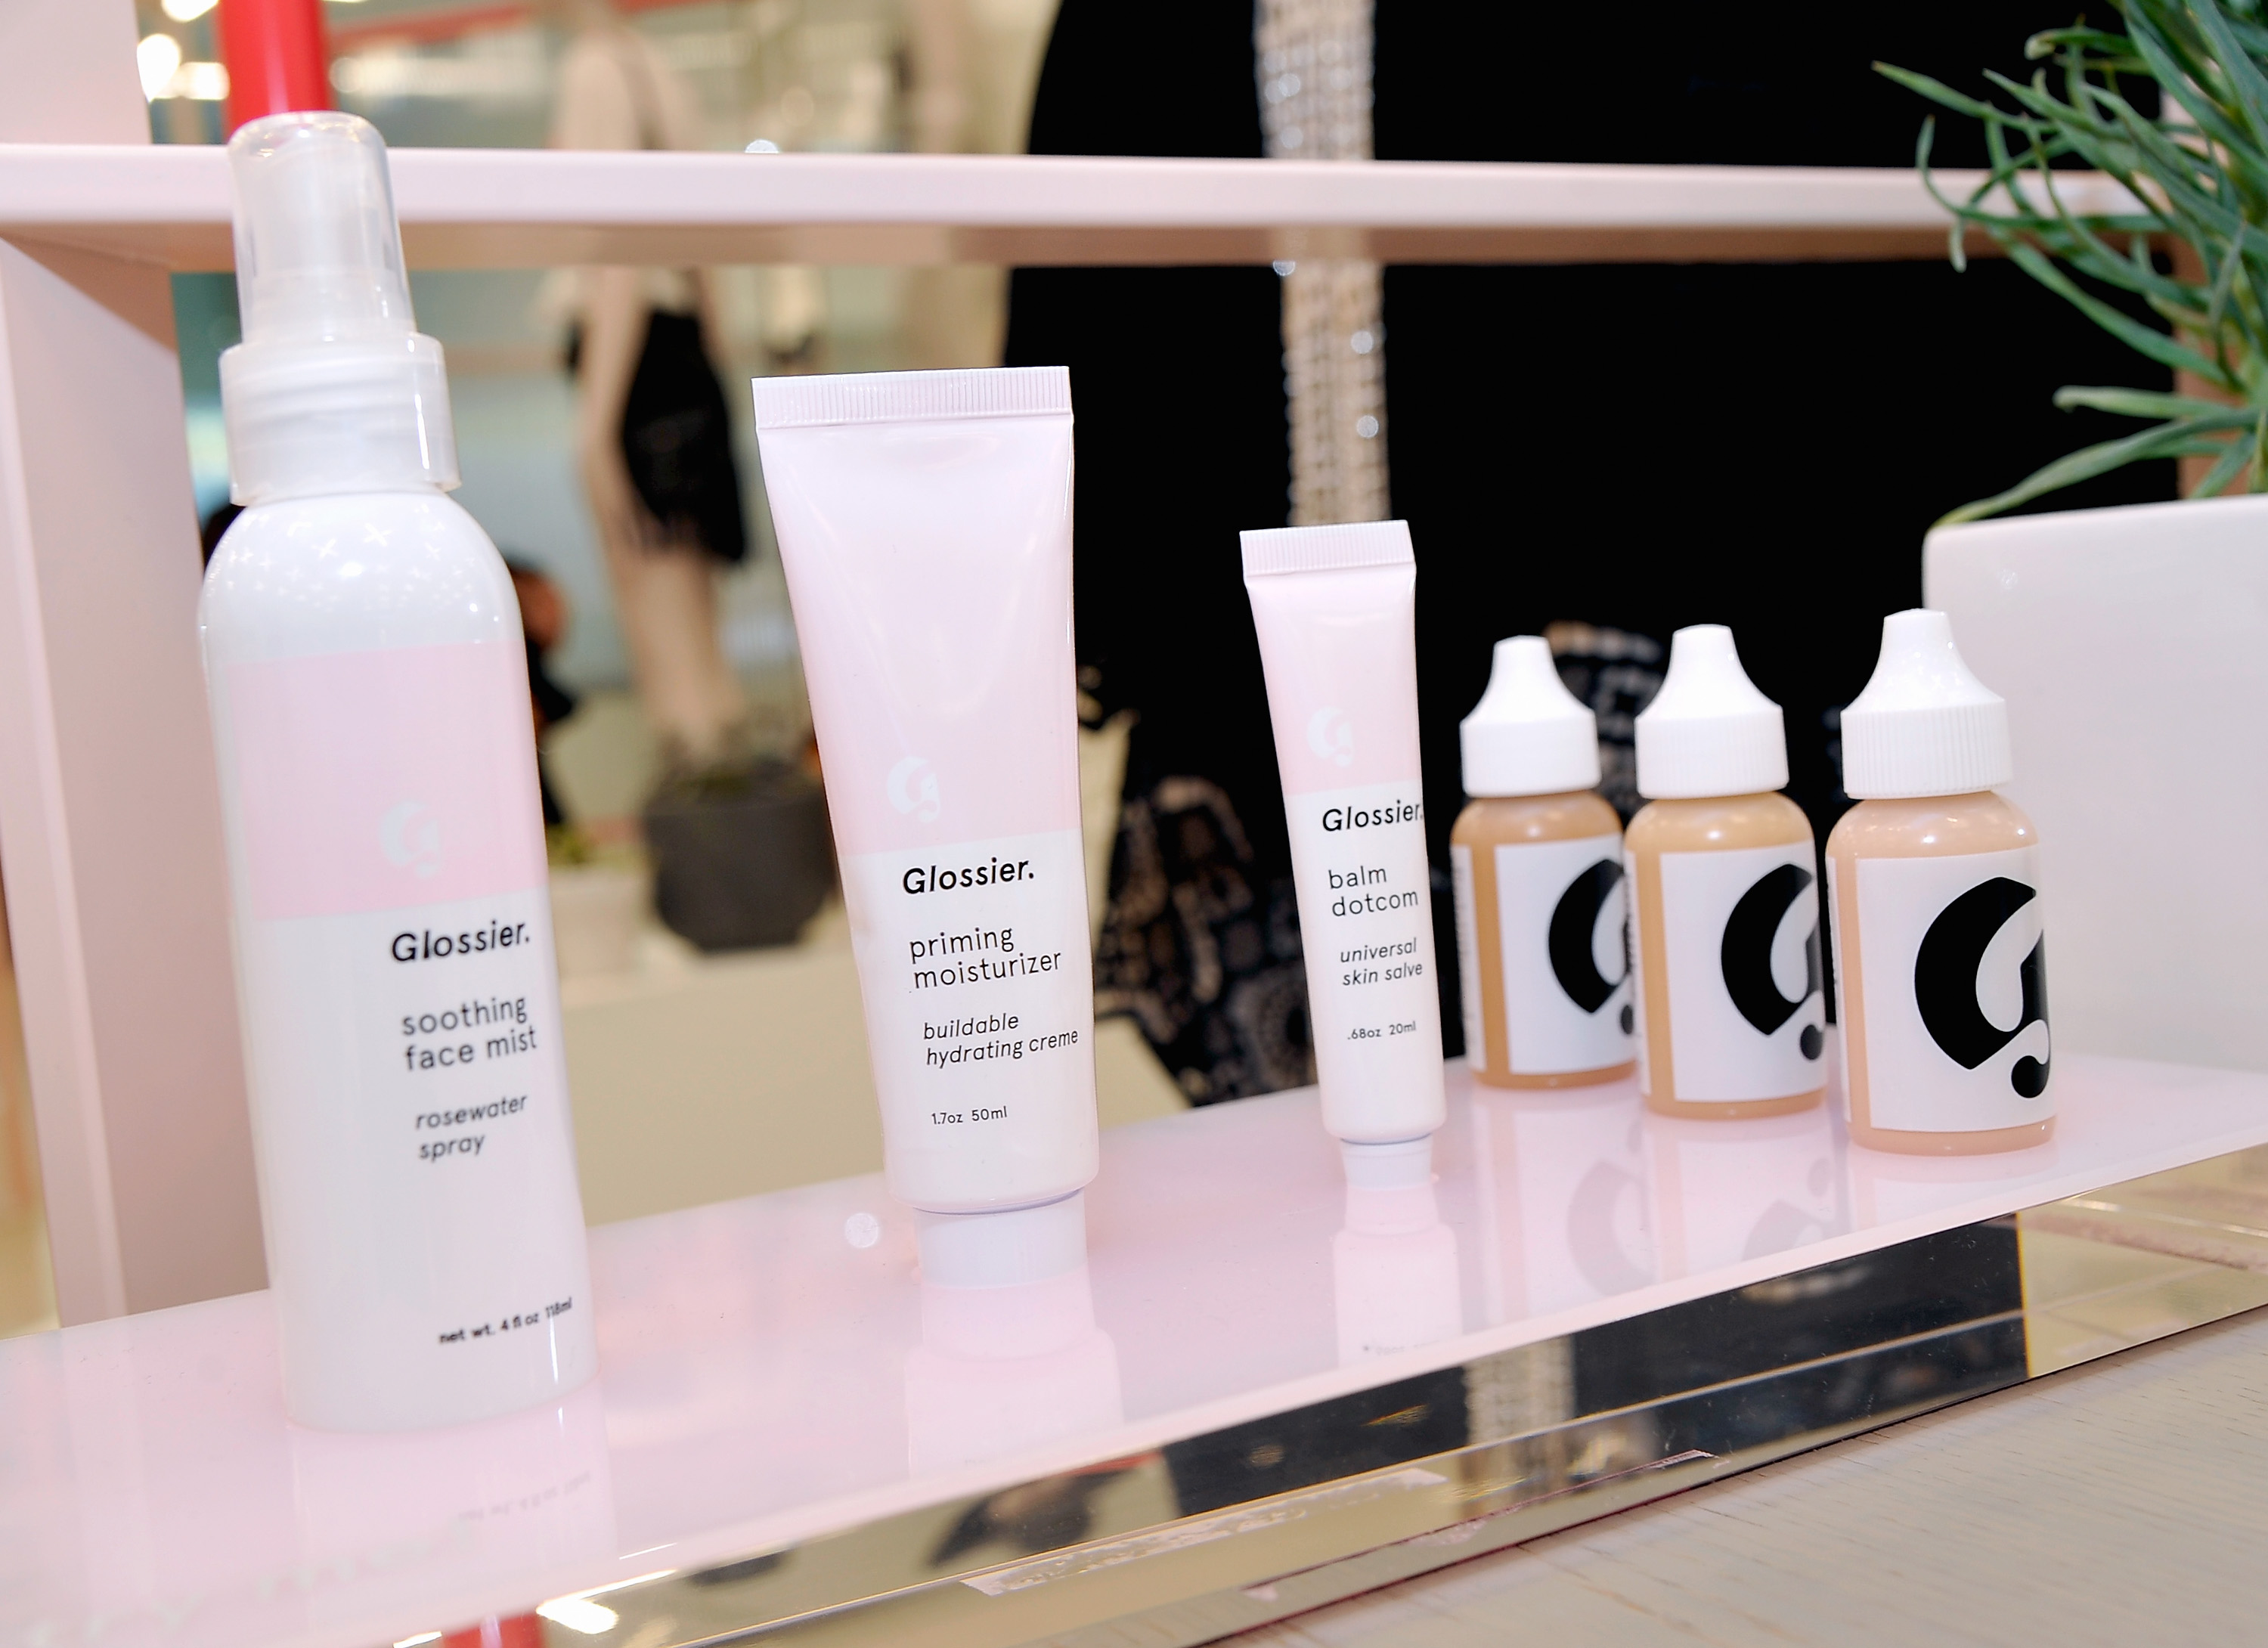 Bottles of Glossier products lined up on a shelf